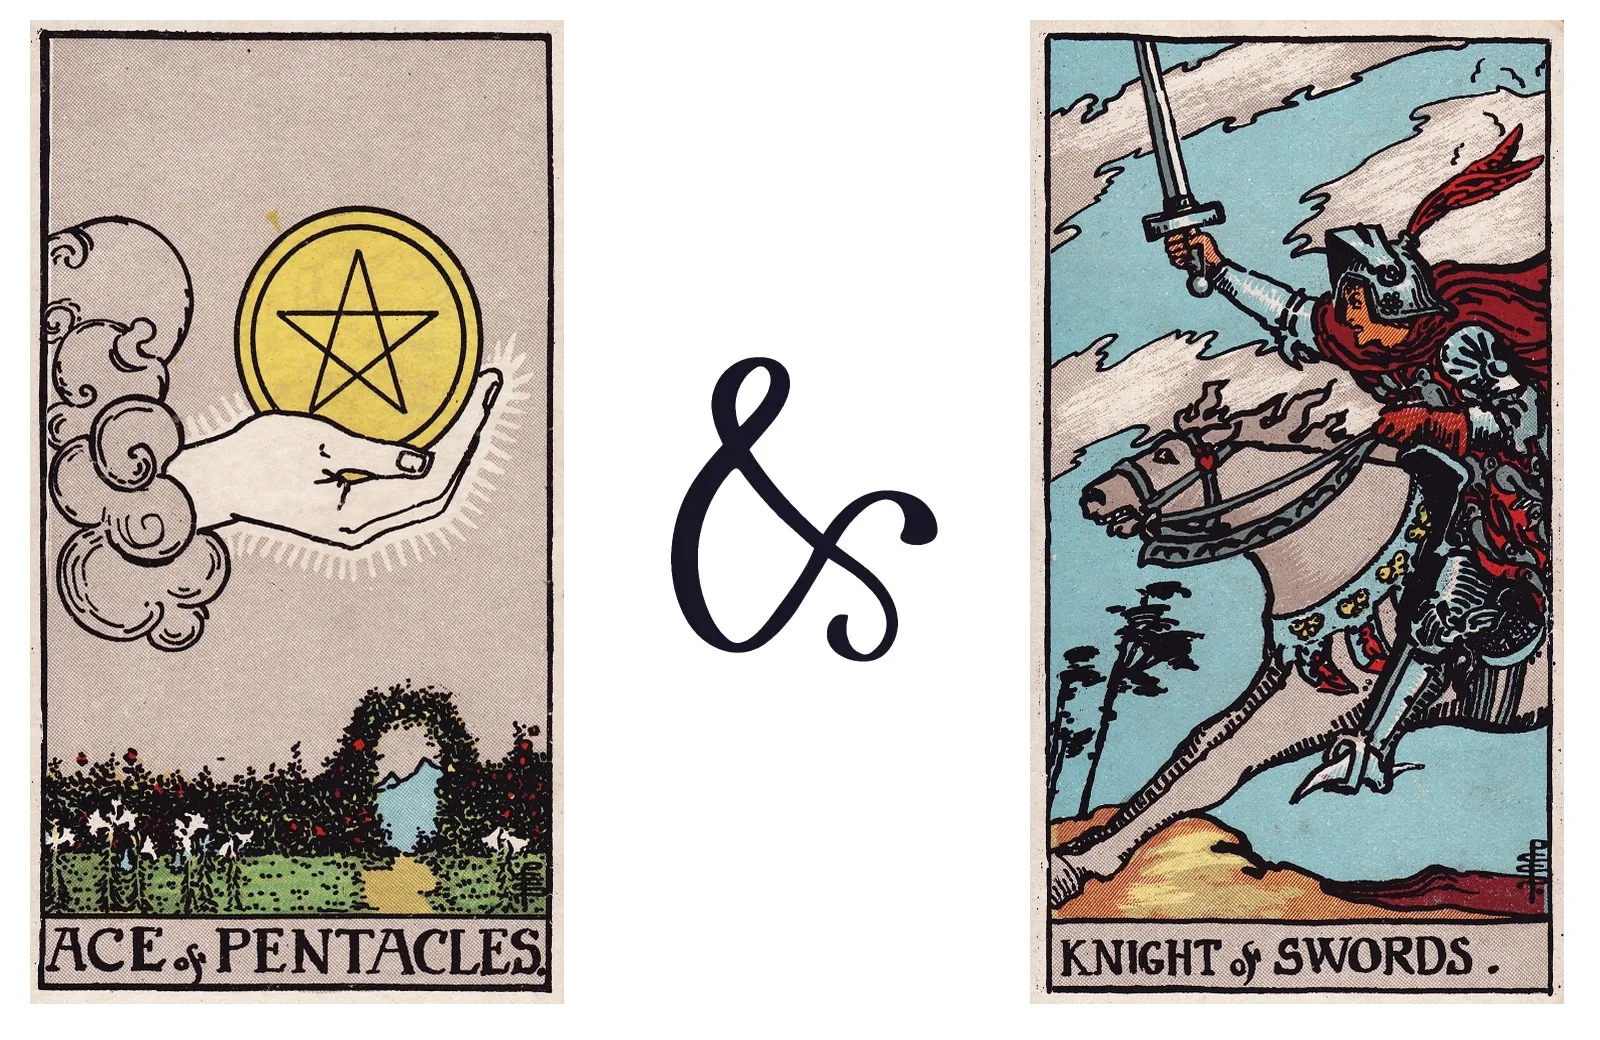 Ace of Pentacles and Knight of Swords